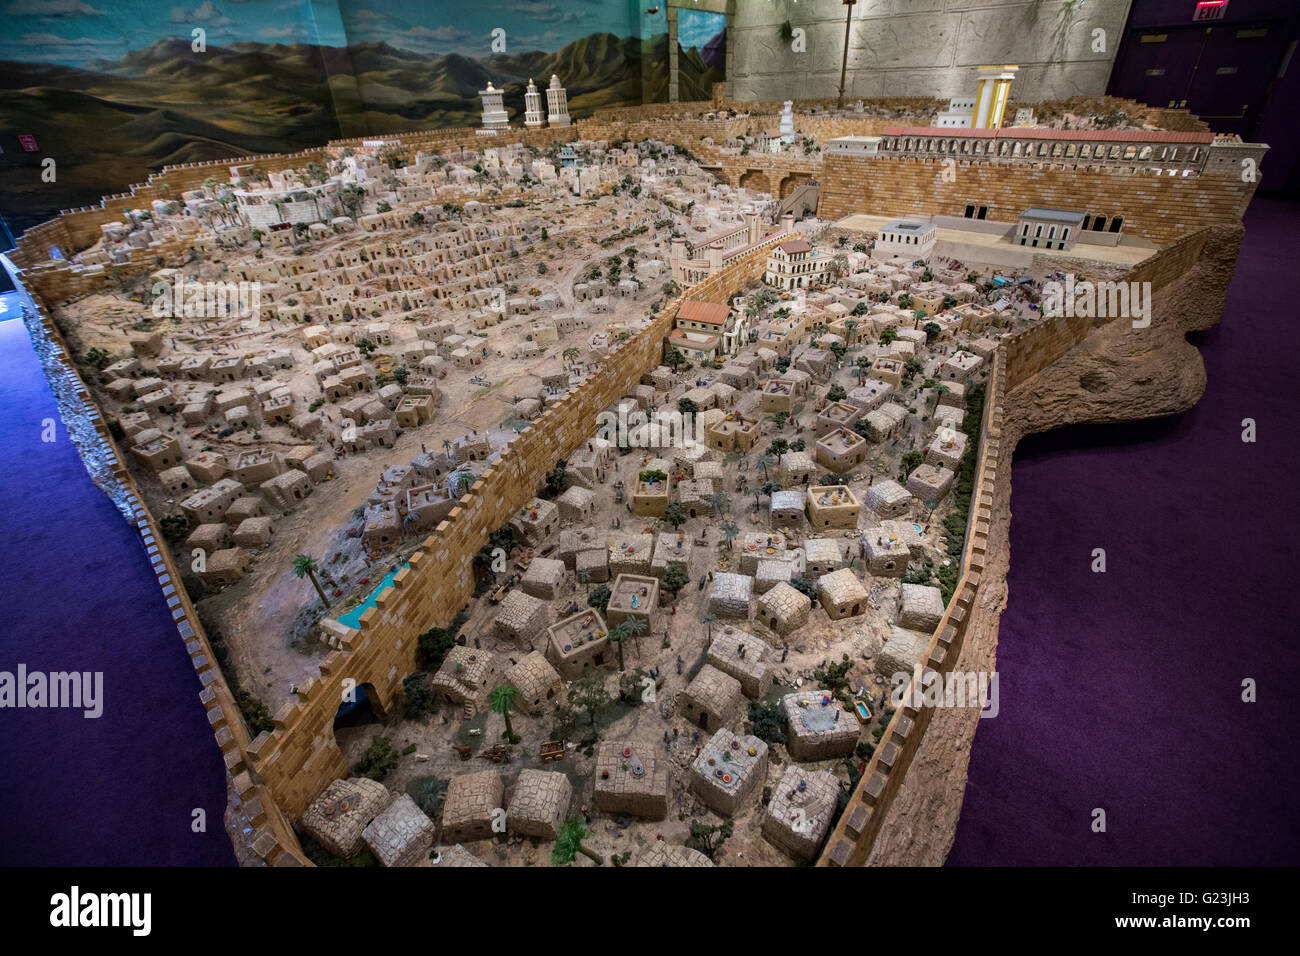 The Jerusalem Model A.D. 66 miniature model of Jerusalem in ancient Judea at the Holy Land Experience Christian theme park in Orlando, Florida. Stock Photo